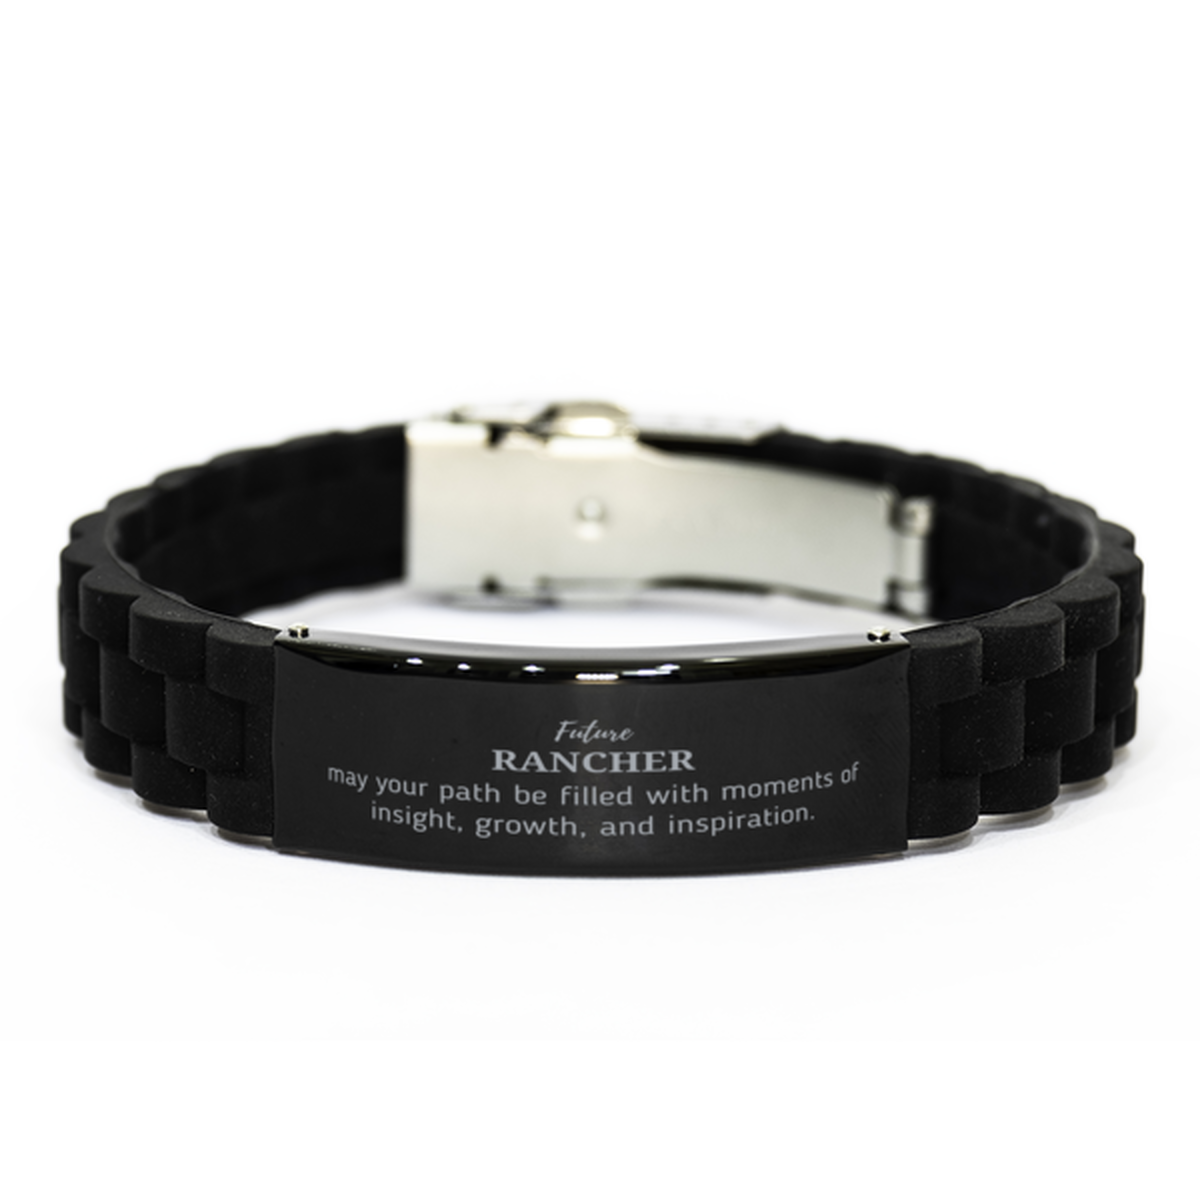 Future Rancher Gifts, May your path be filled with moments of insight, Graduation Gifts for New Rancher, Christmas Unique Black Glidelock Clasp Bracelet For Men, Women, Friends